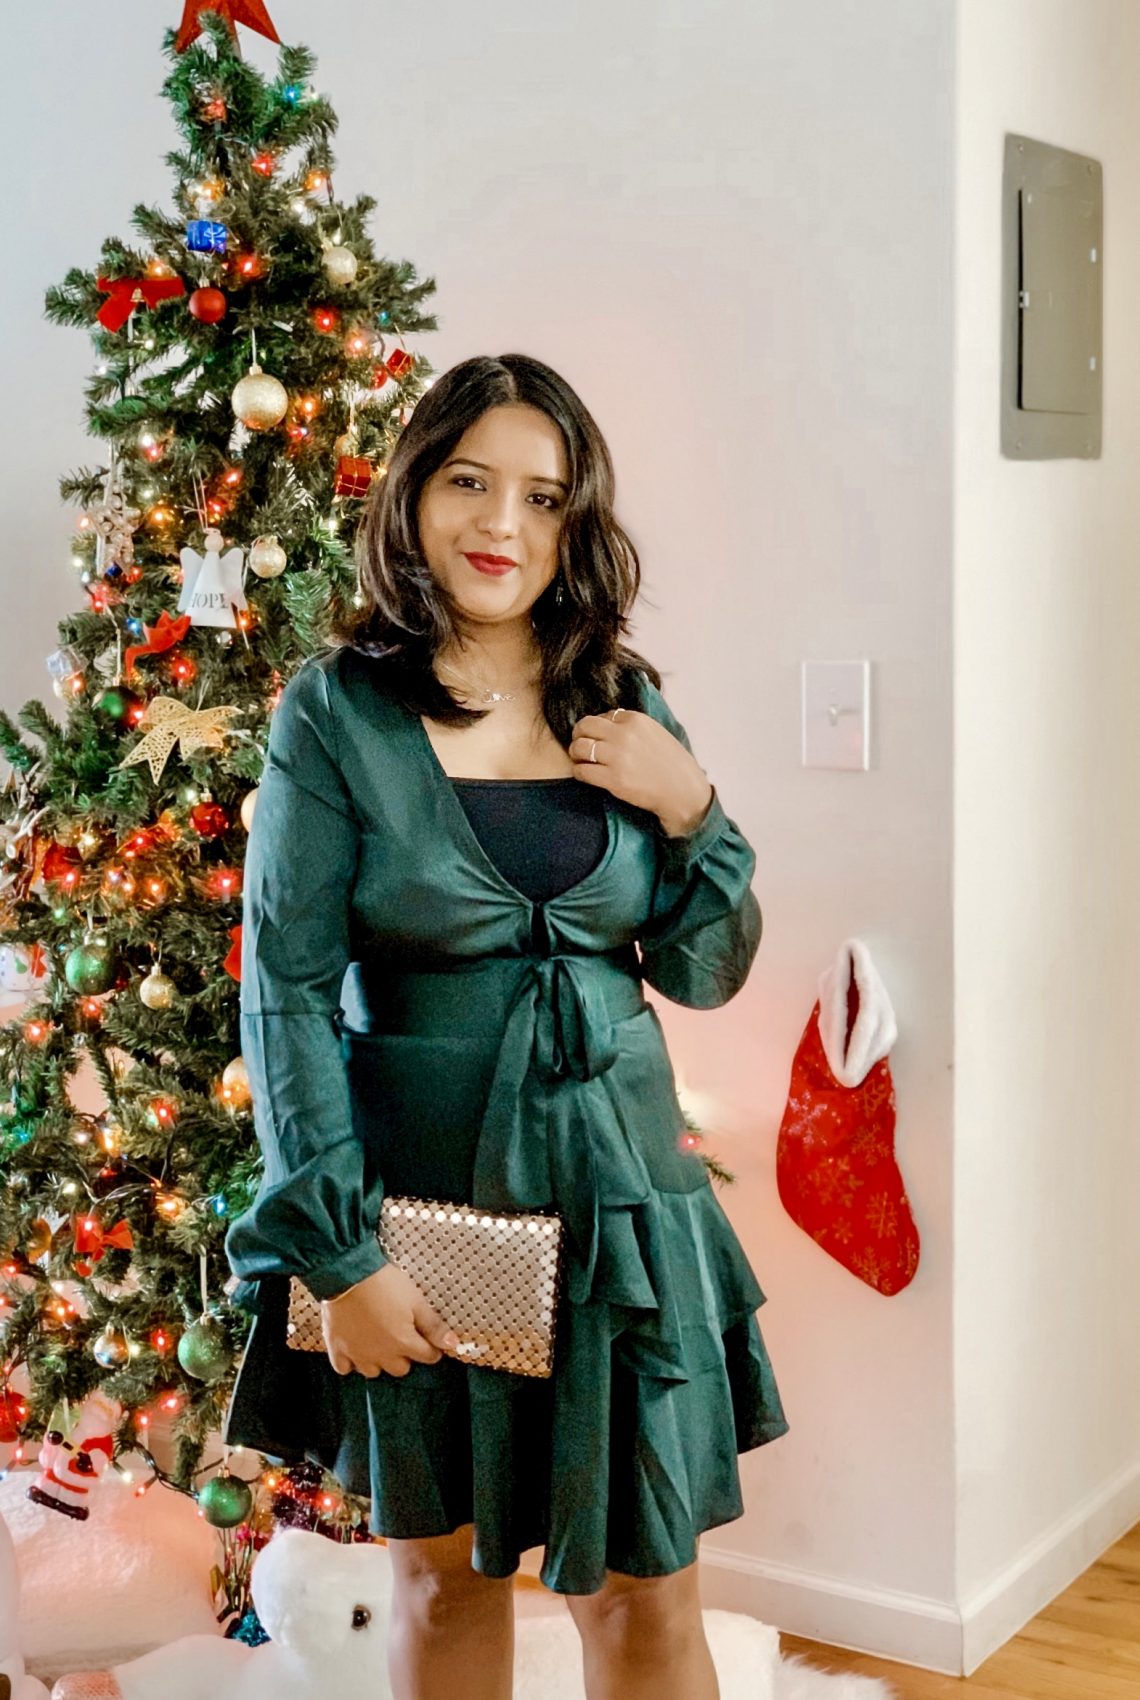 Holiday outfit ideas 2019